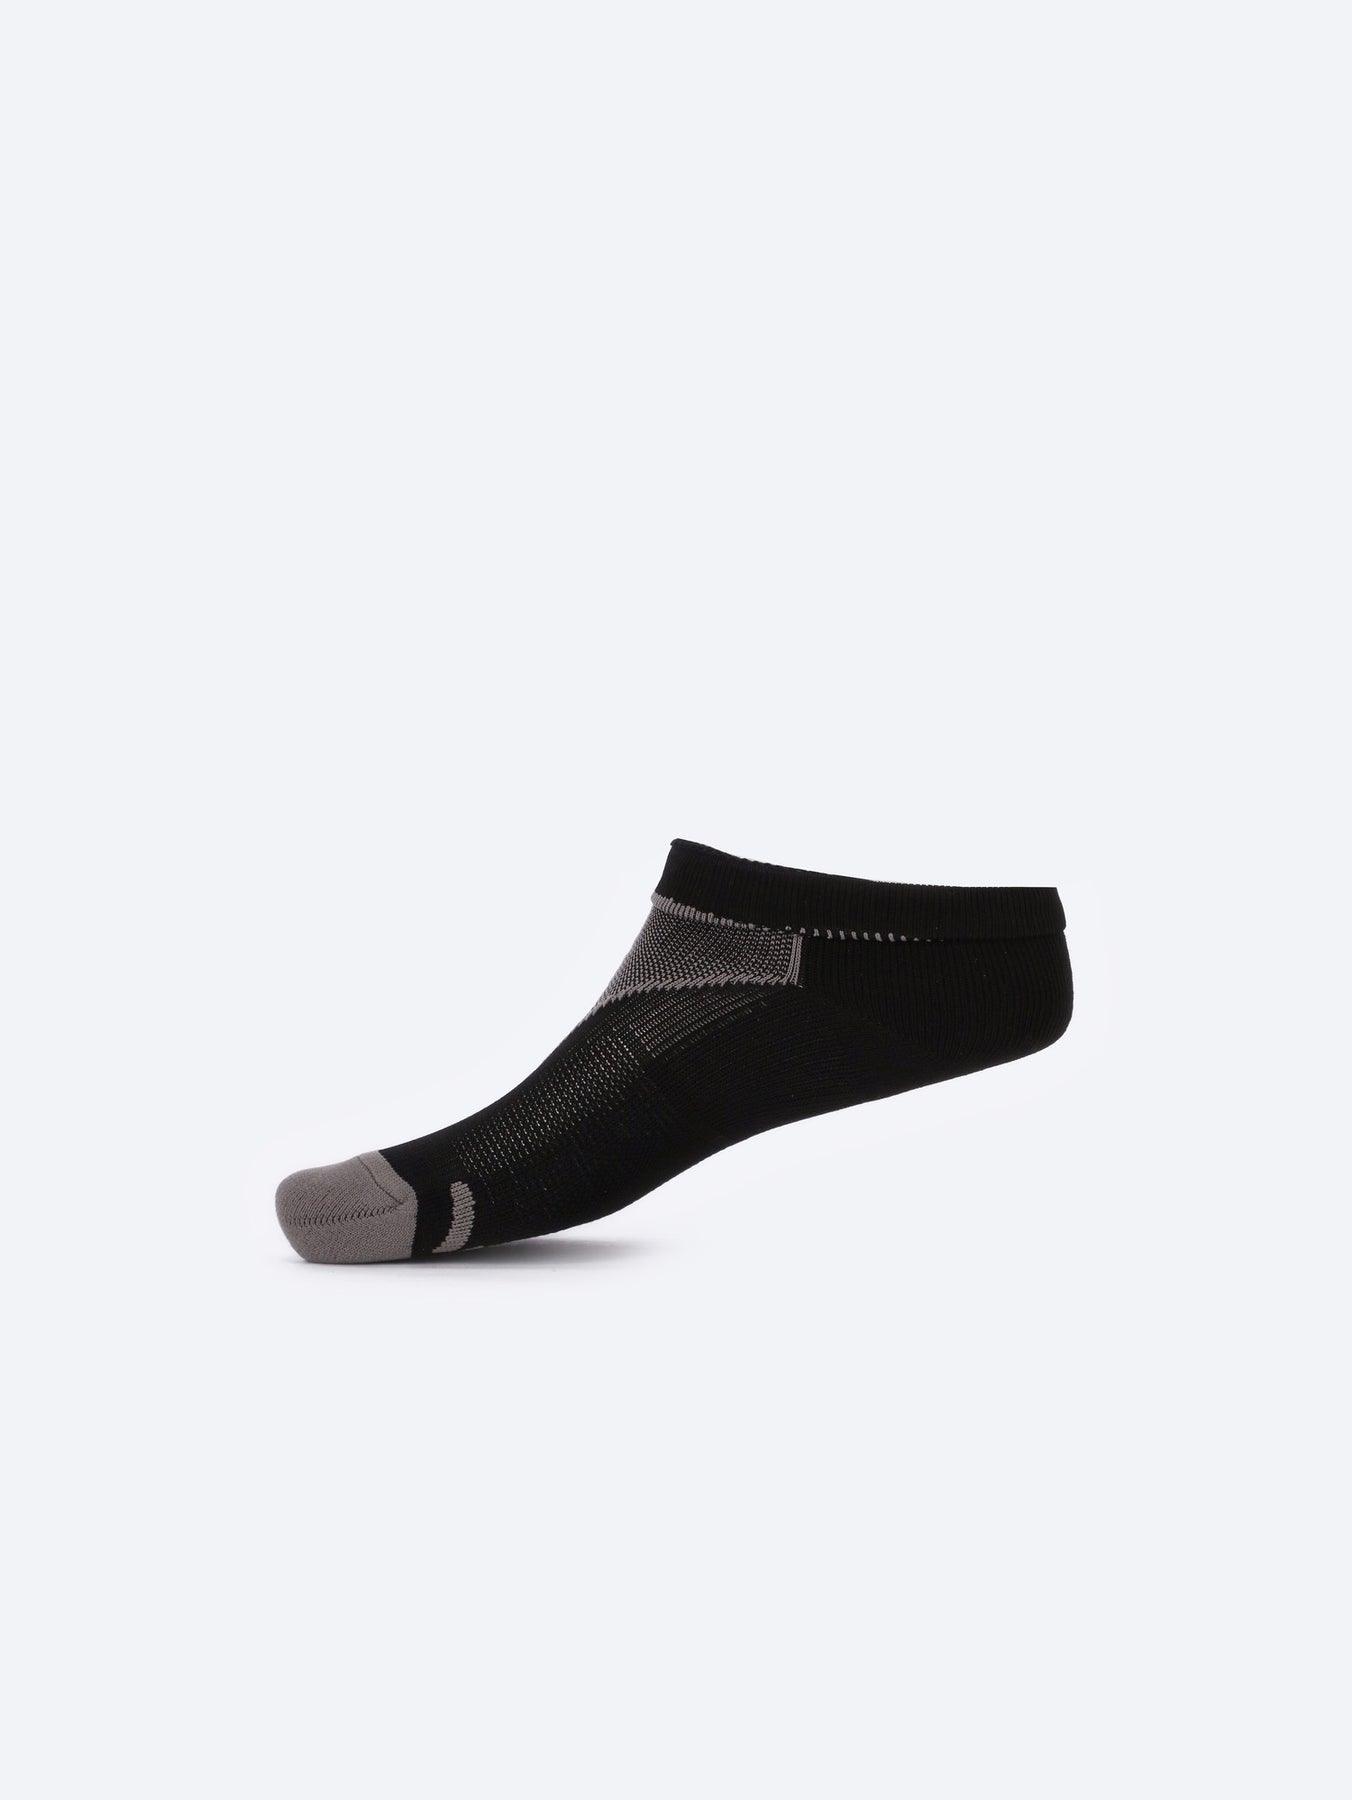 Photo by 𝗔𝗧𝗨𝗠 SPORTSWEAR ® on December 26, 2022. May be of gray/black low-cut kid's socks with atum logo